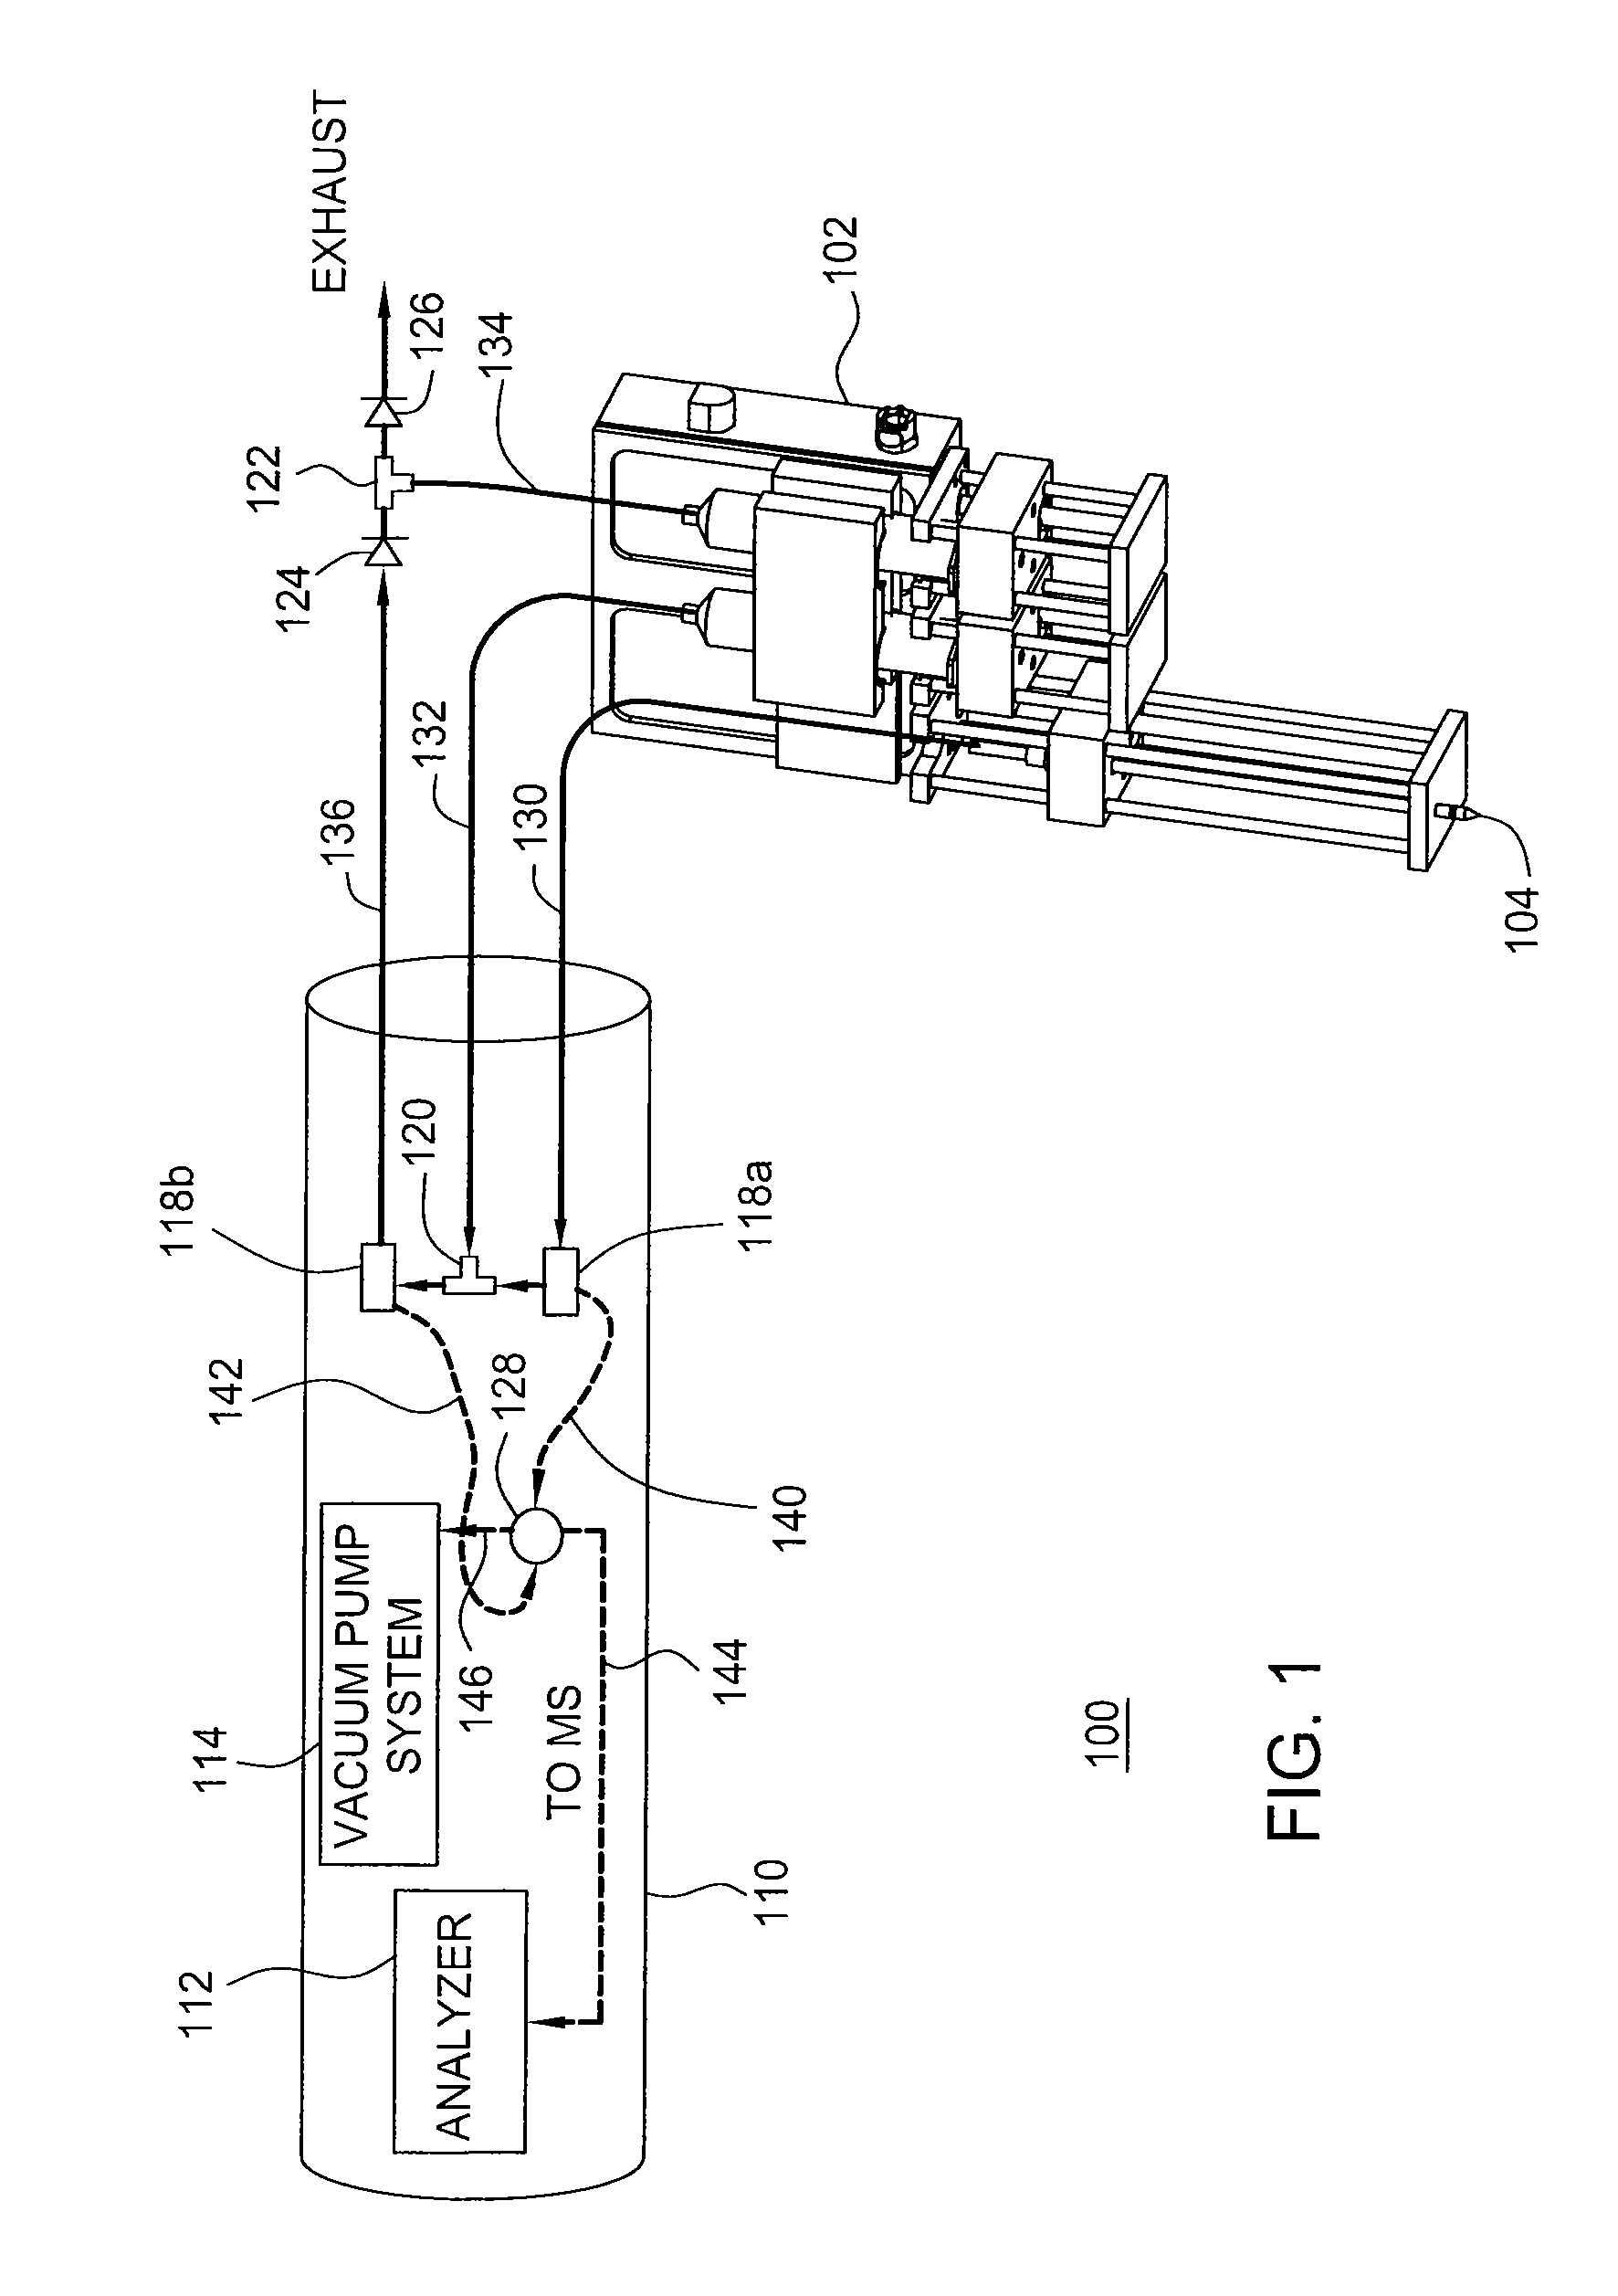 Method and apparatus for measuring multiple parameters in-situ of a sample collected from environmental systems